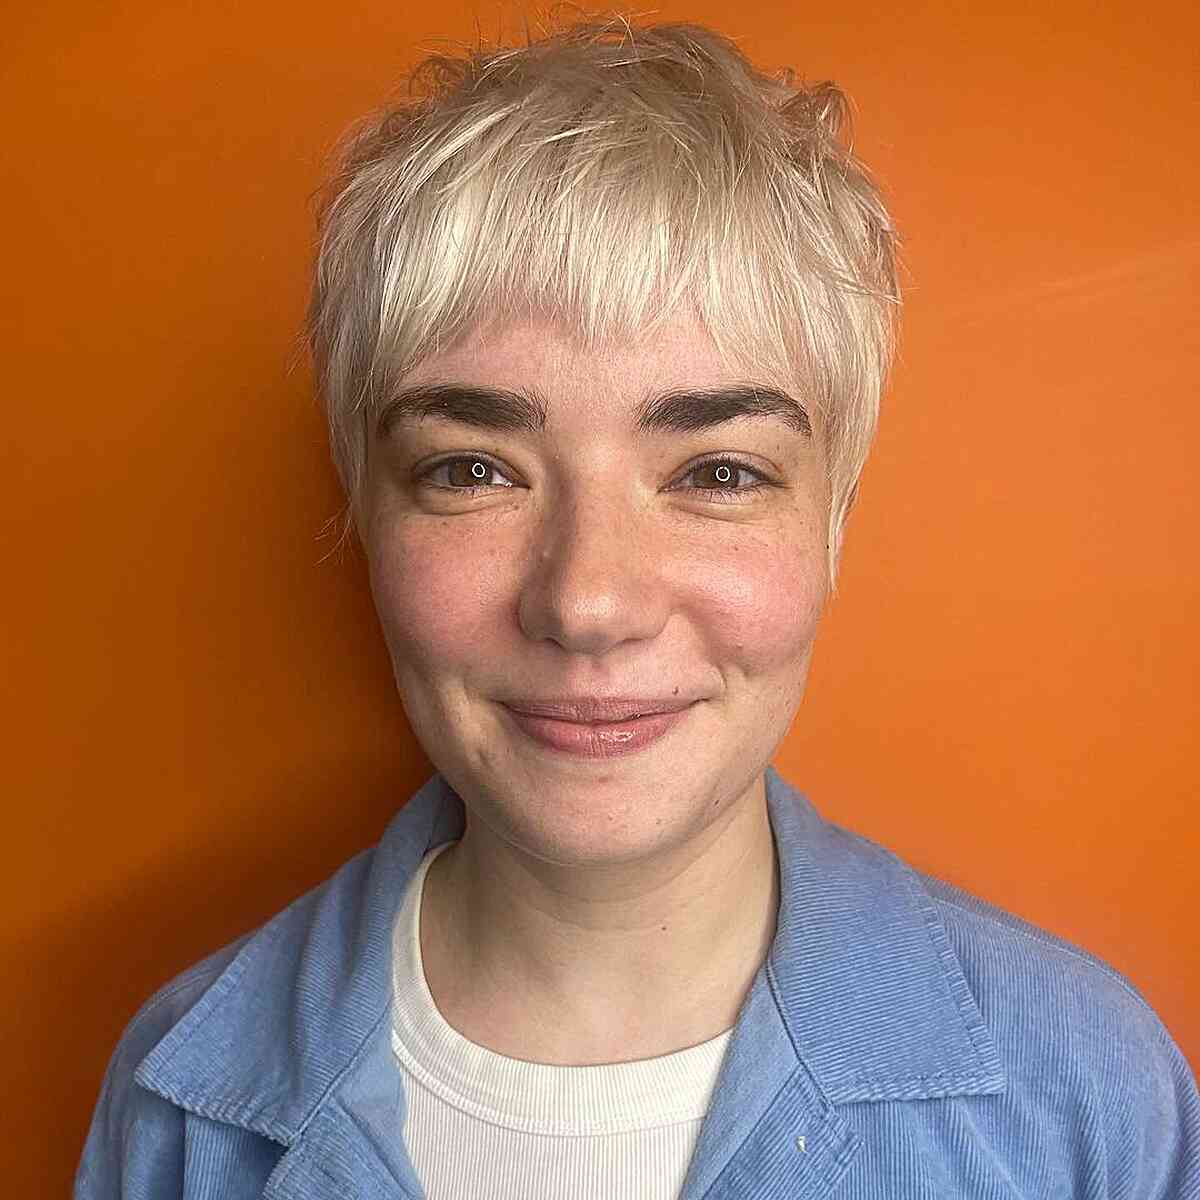 90s-Inspired Bleach Blonde Pixie with Thin Bangs